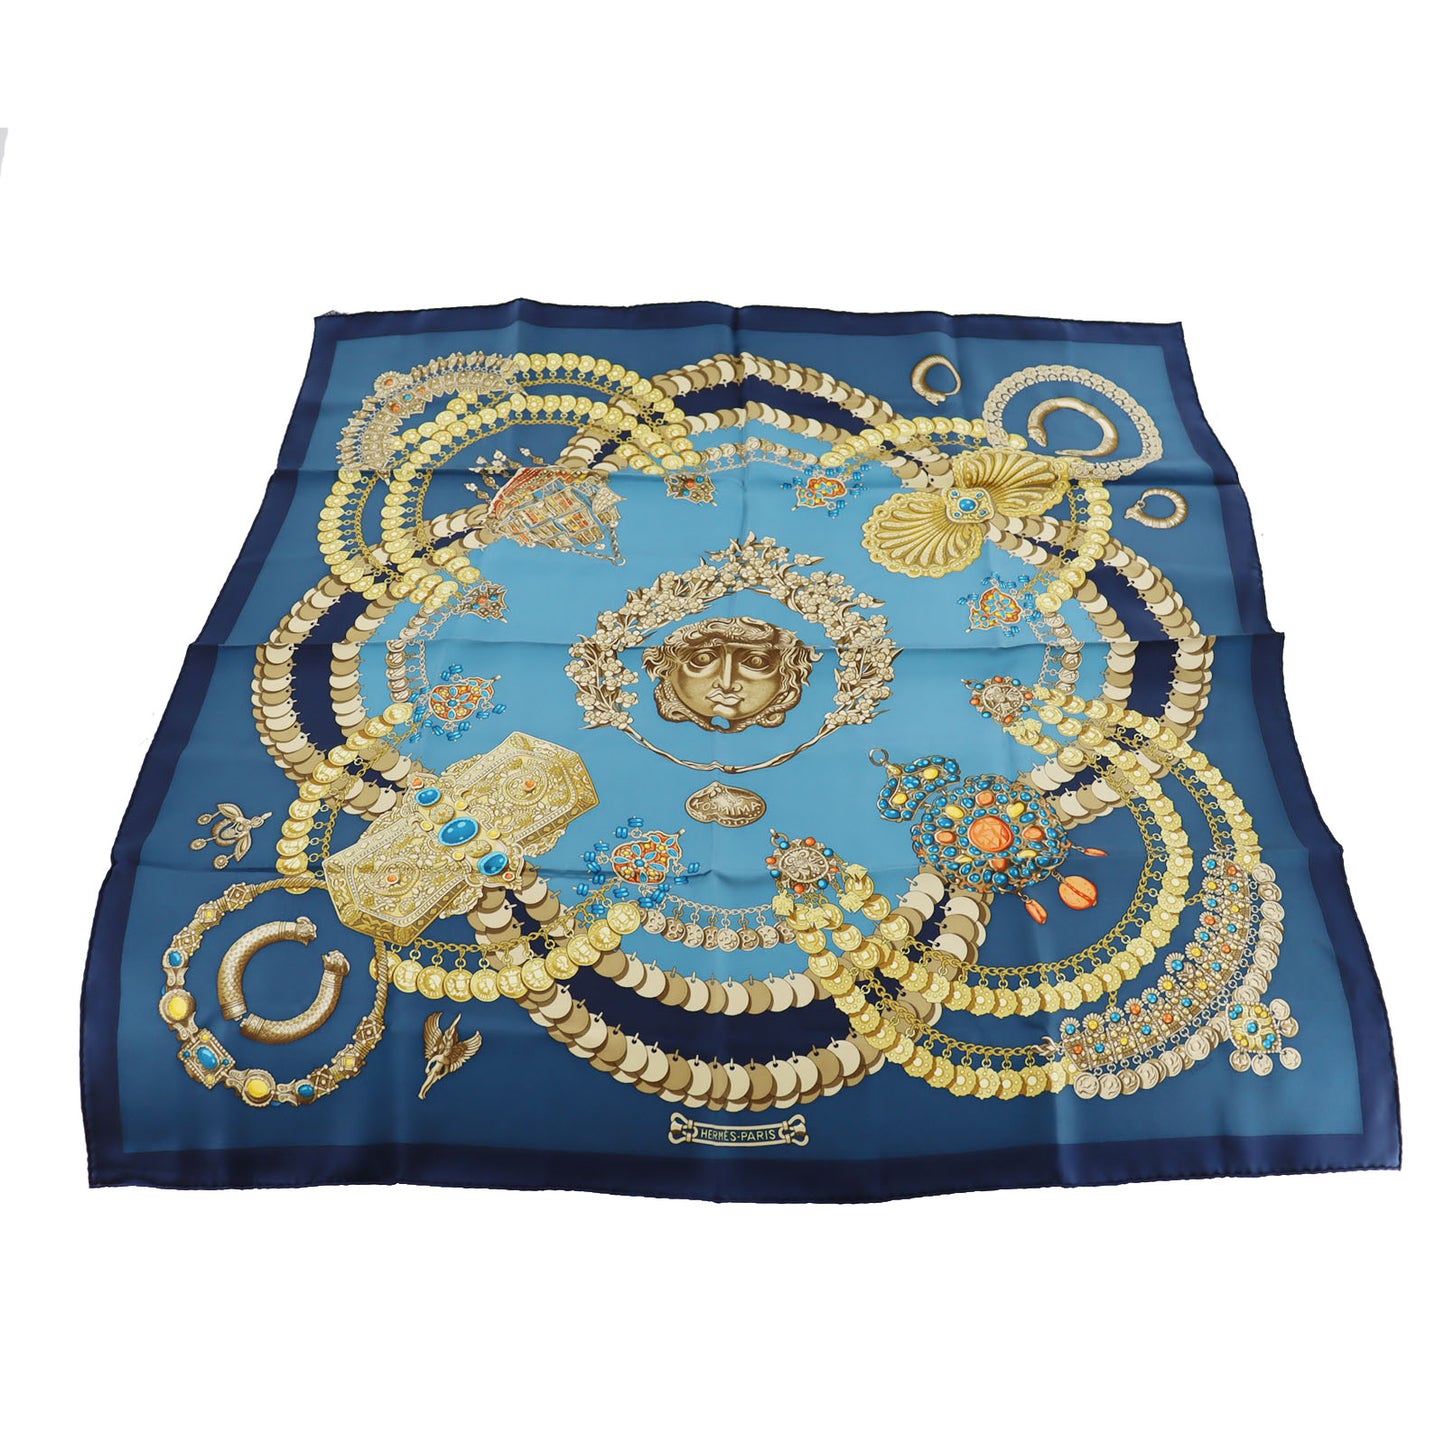 HERMES Logos Jewelry Design Large Scarf Blue 100% Silk #BY629